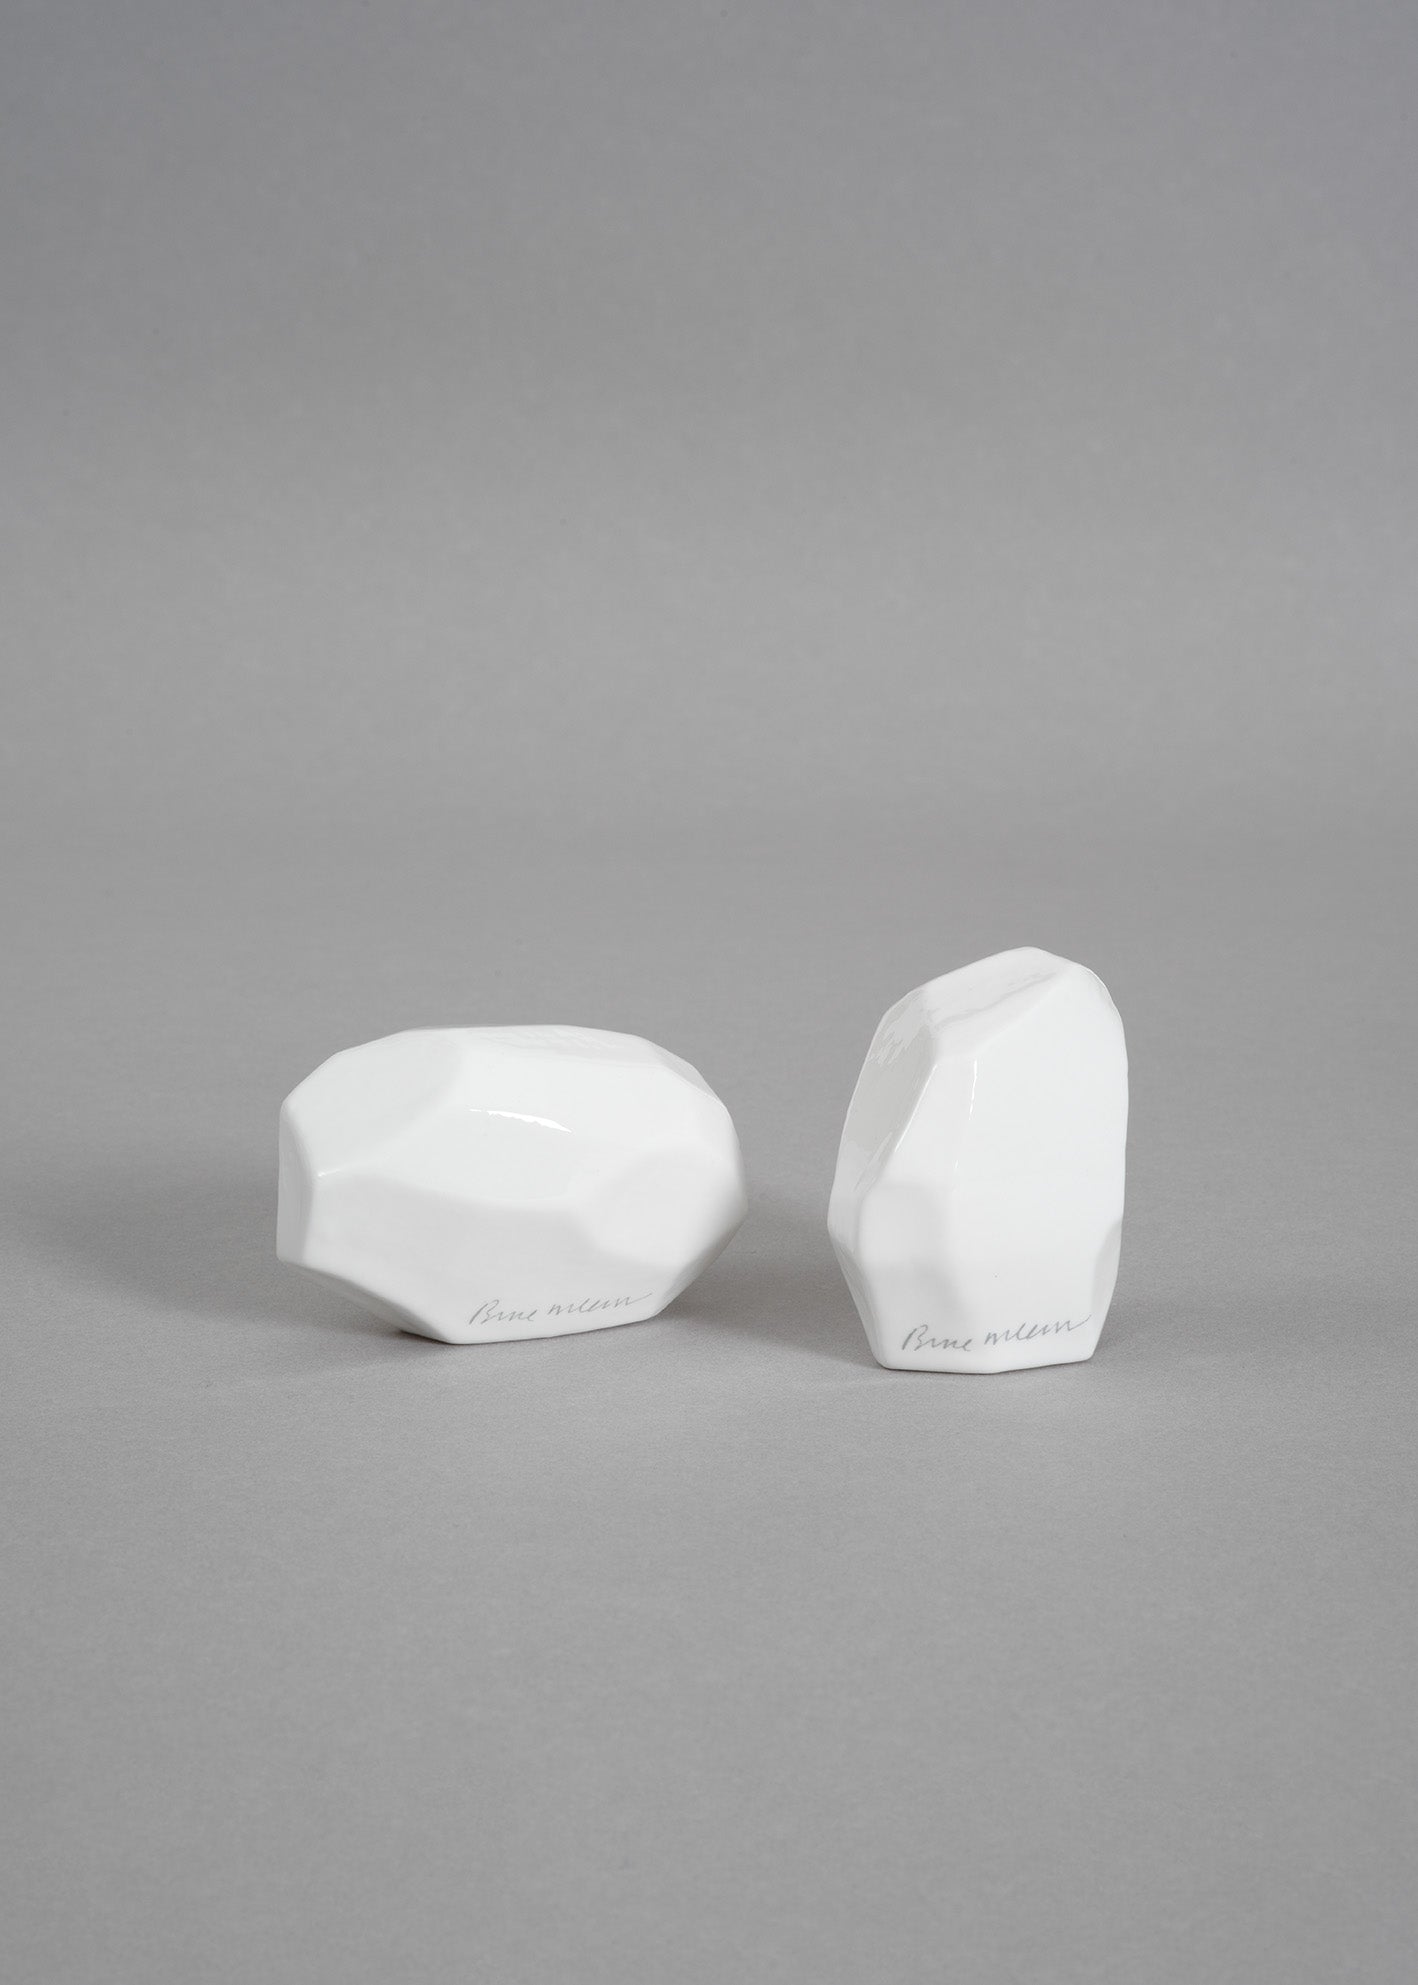 Bruce McLean, ‘Two carefully peeled potatoes in porcelain’, 2020